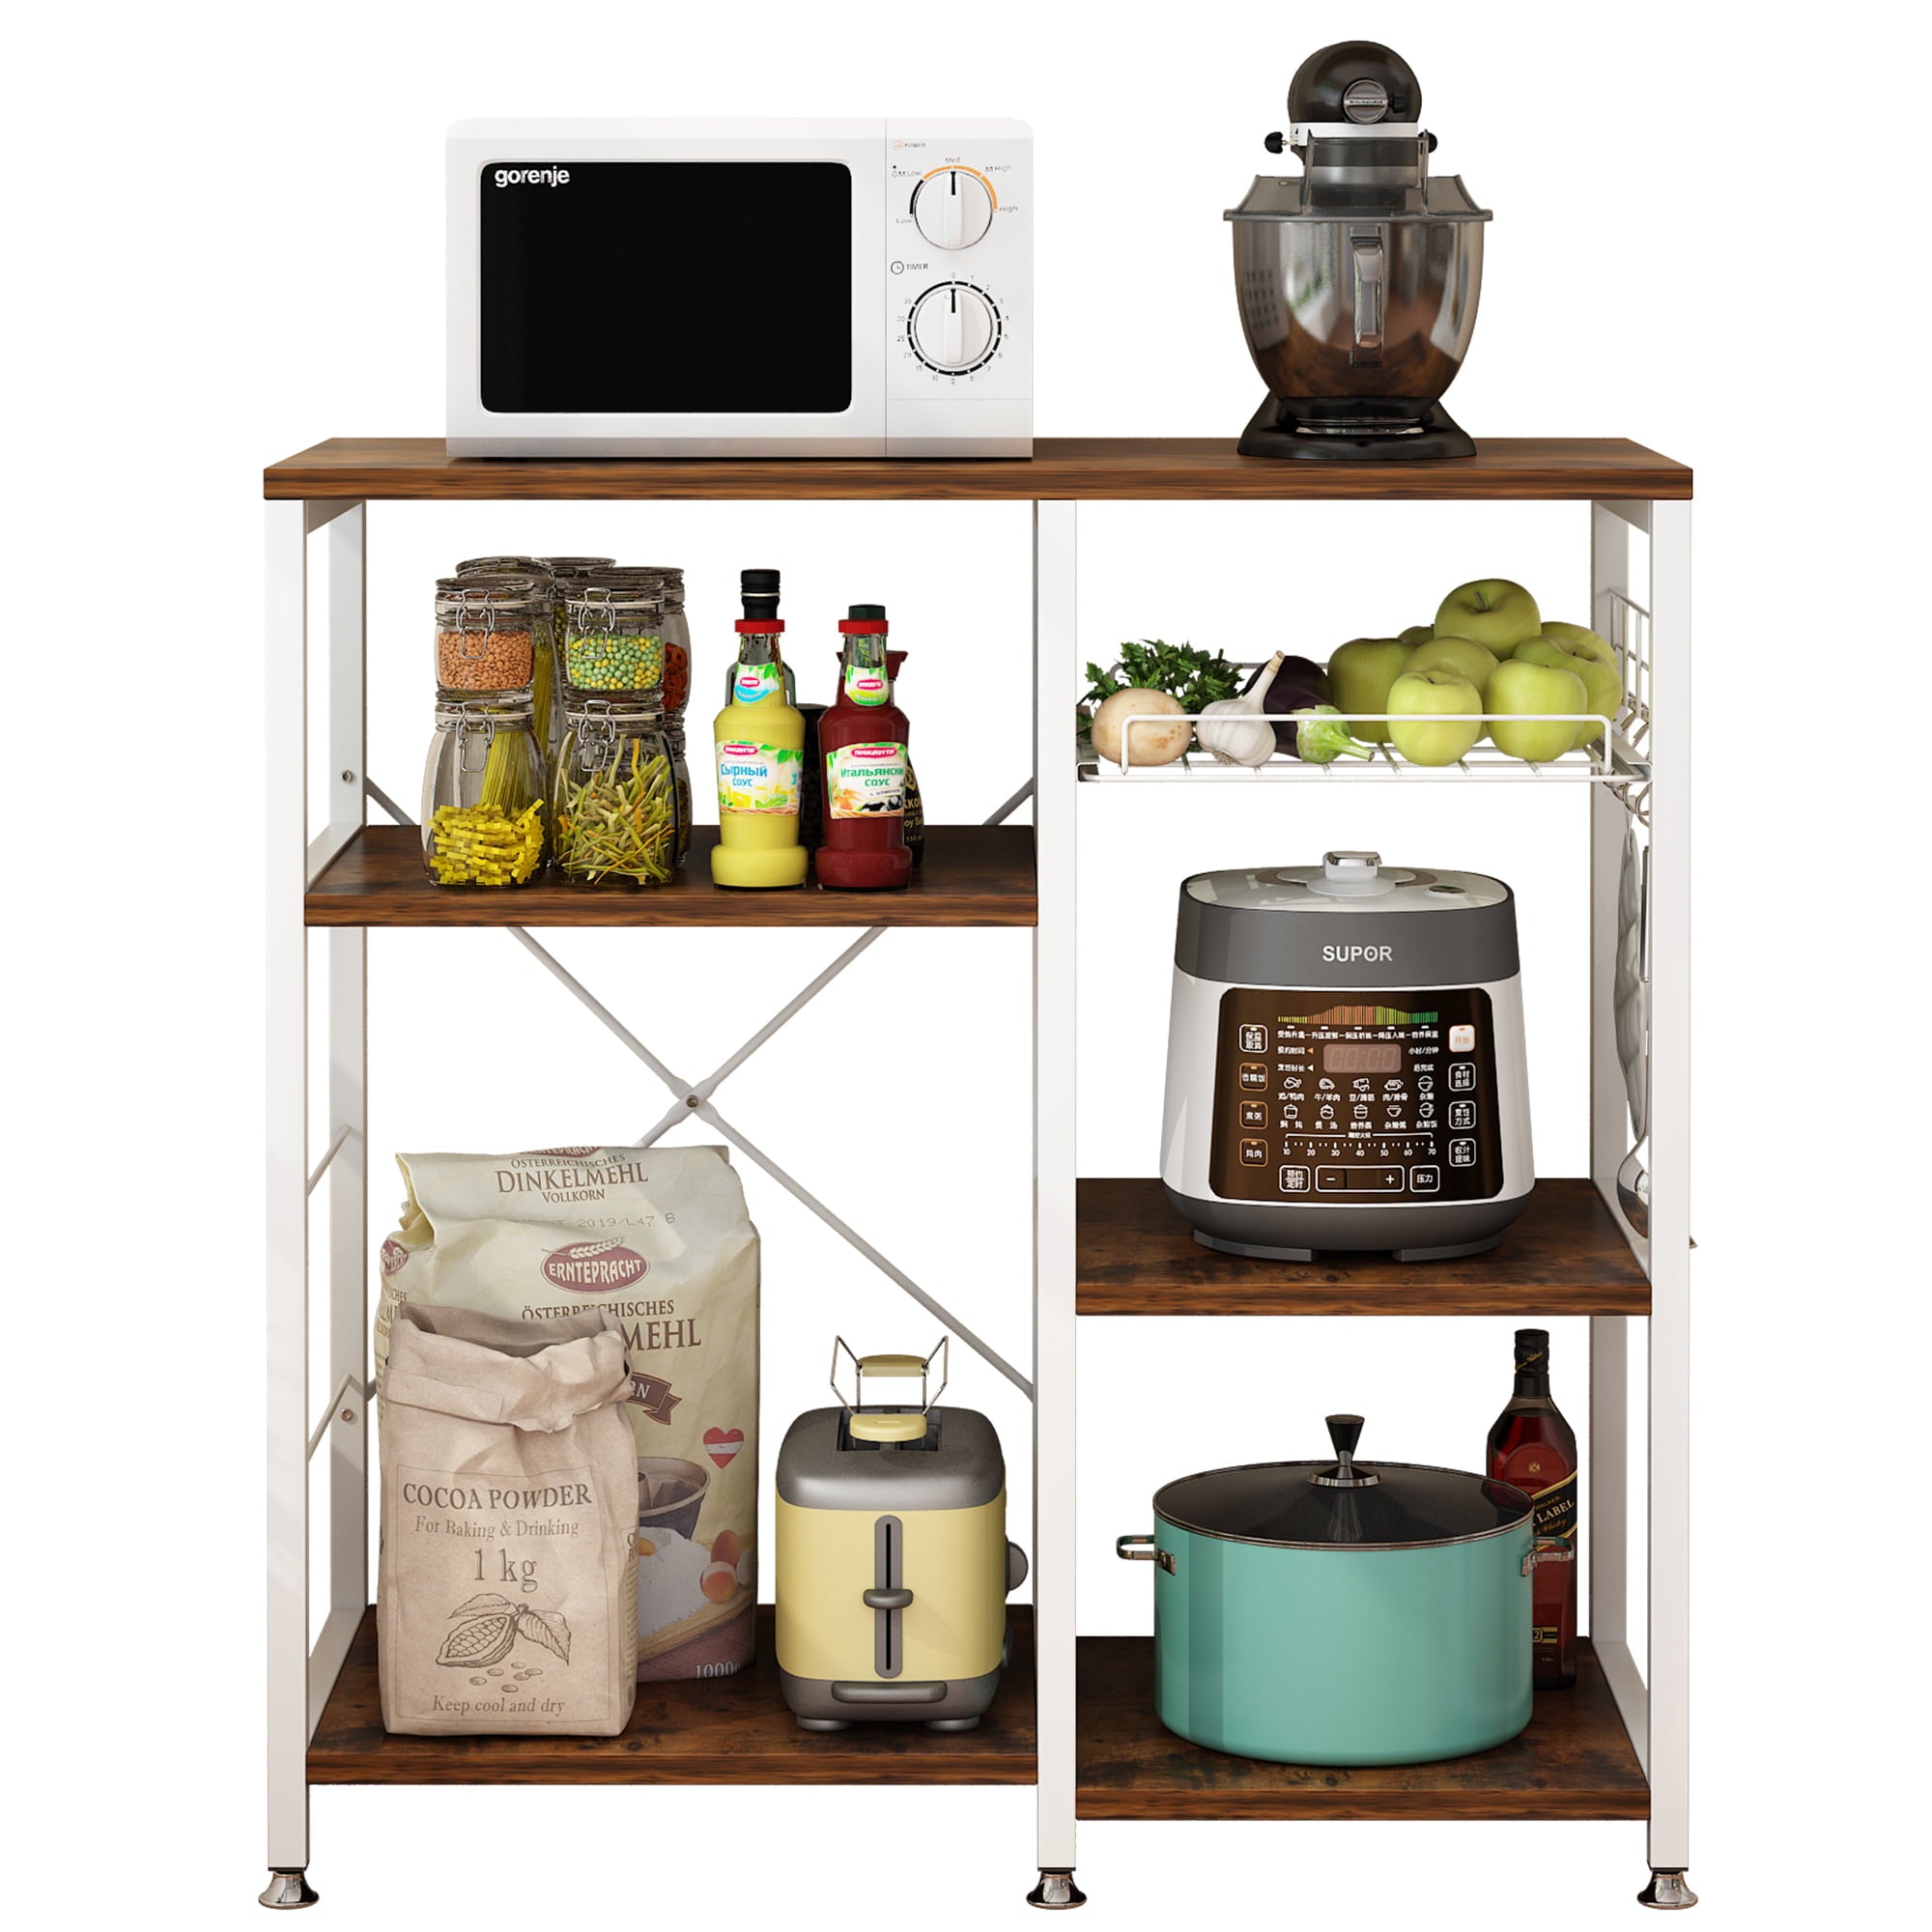 Zimtown Industrial Bakers Rack， Kitchen Microwave Oven Stand， Kitchen Island Storage Shelves Workstation with 2 Mesh Baskets and 6 Hooks，Rustic Brown